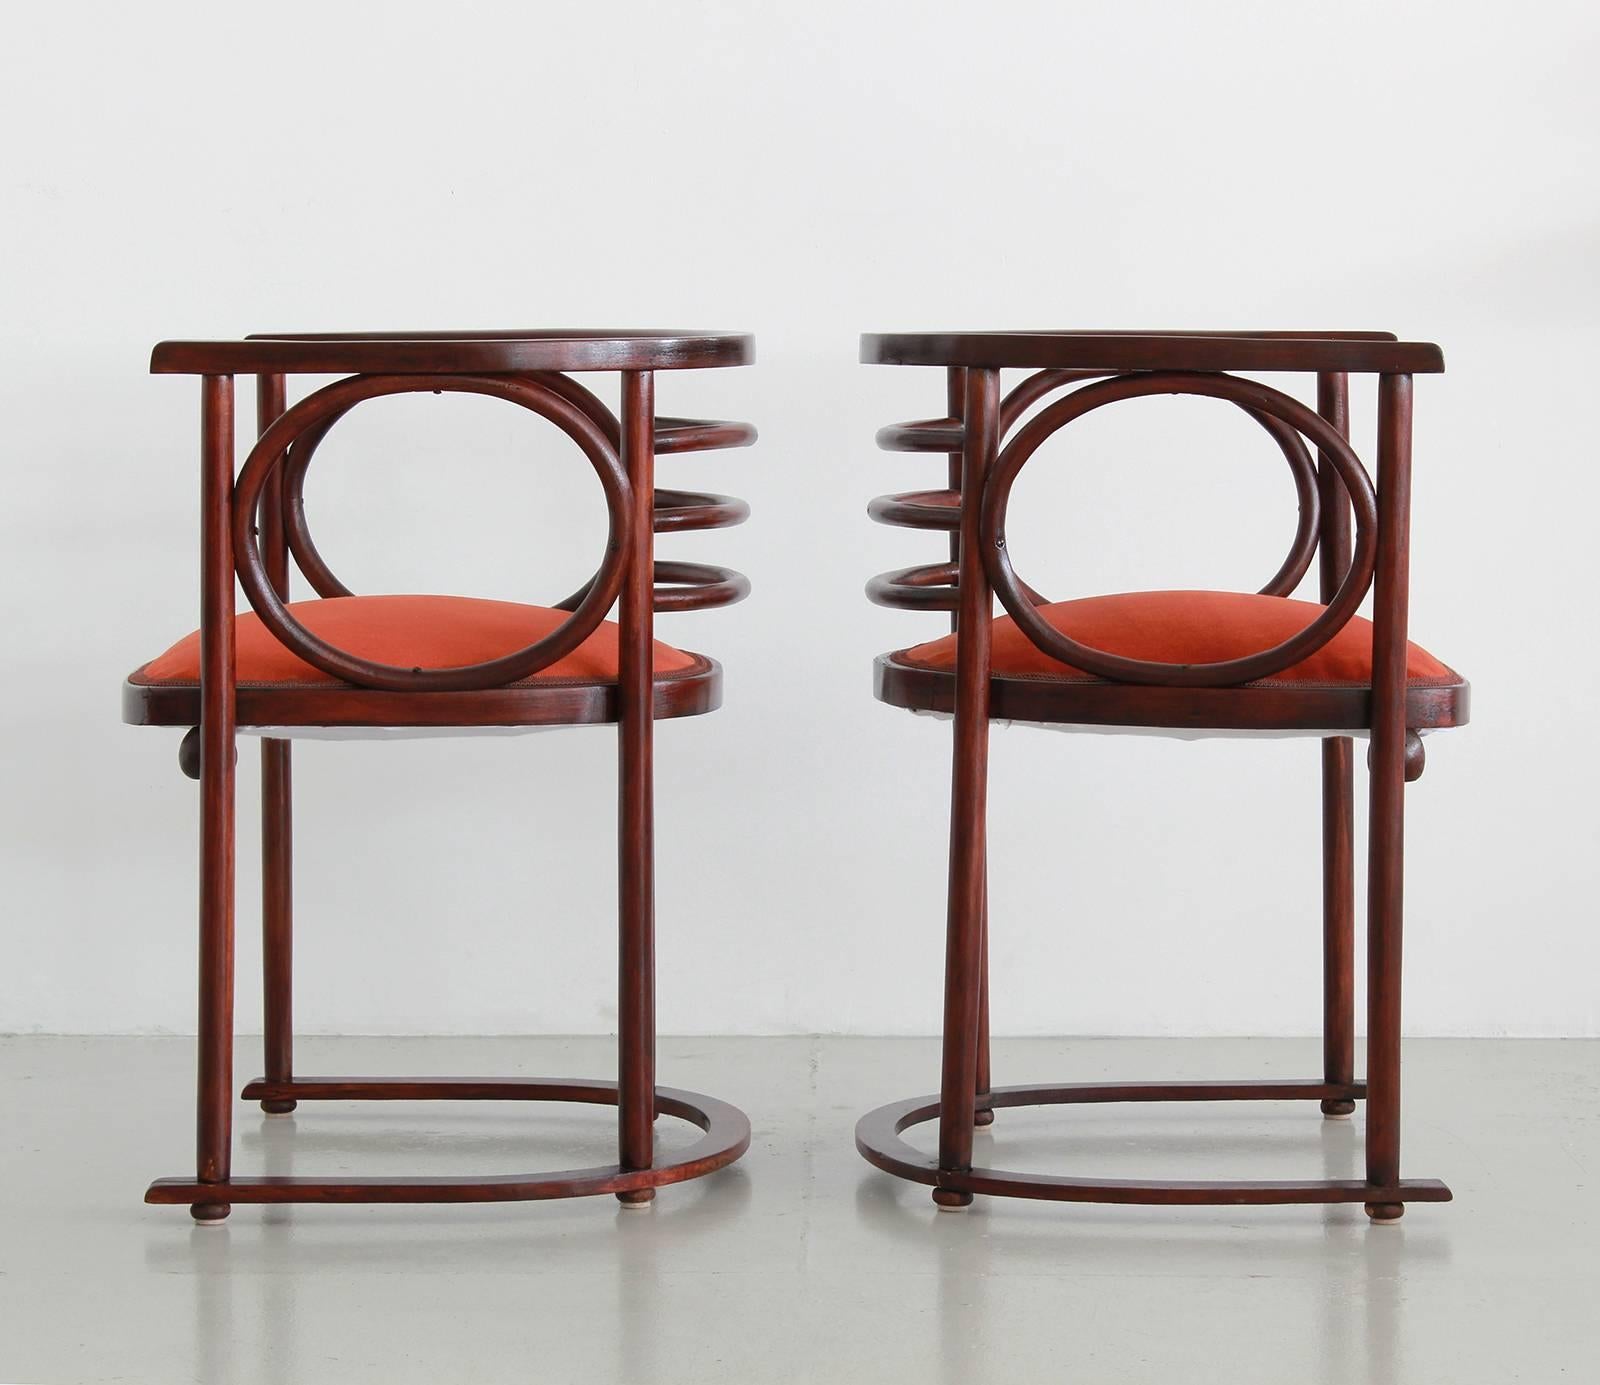 Gorgeous pair of Fledermaus chairs by Austrian architect Josef Hoffman, one of the founding fathers of the Vienna Succession and the International Style, influencing such masters as Alvar Aalto, Le Corbusier and Carlo Scarpa. 
Celebrated for his